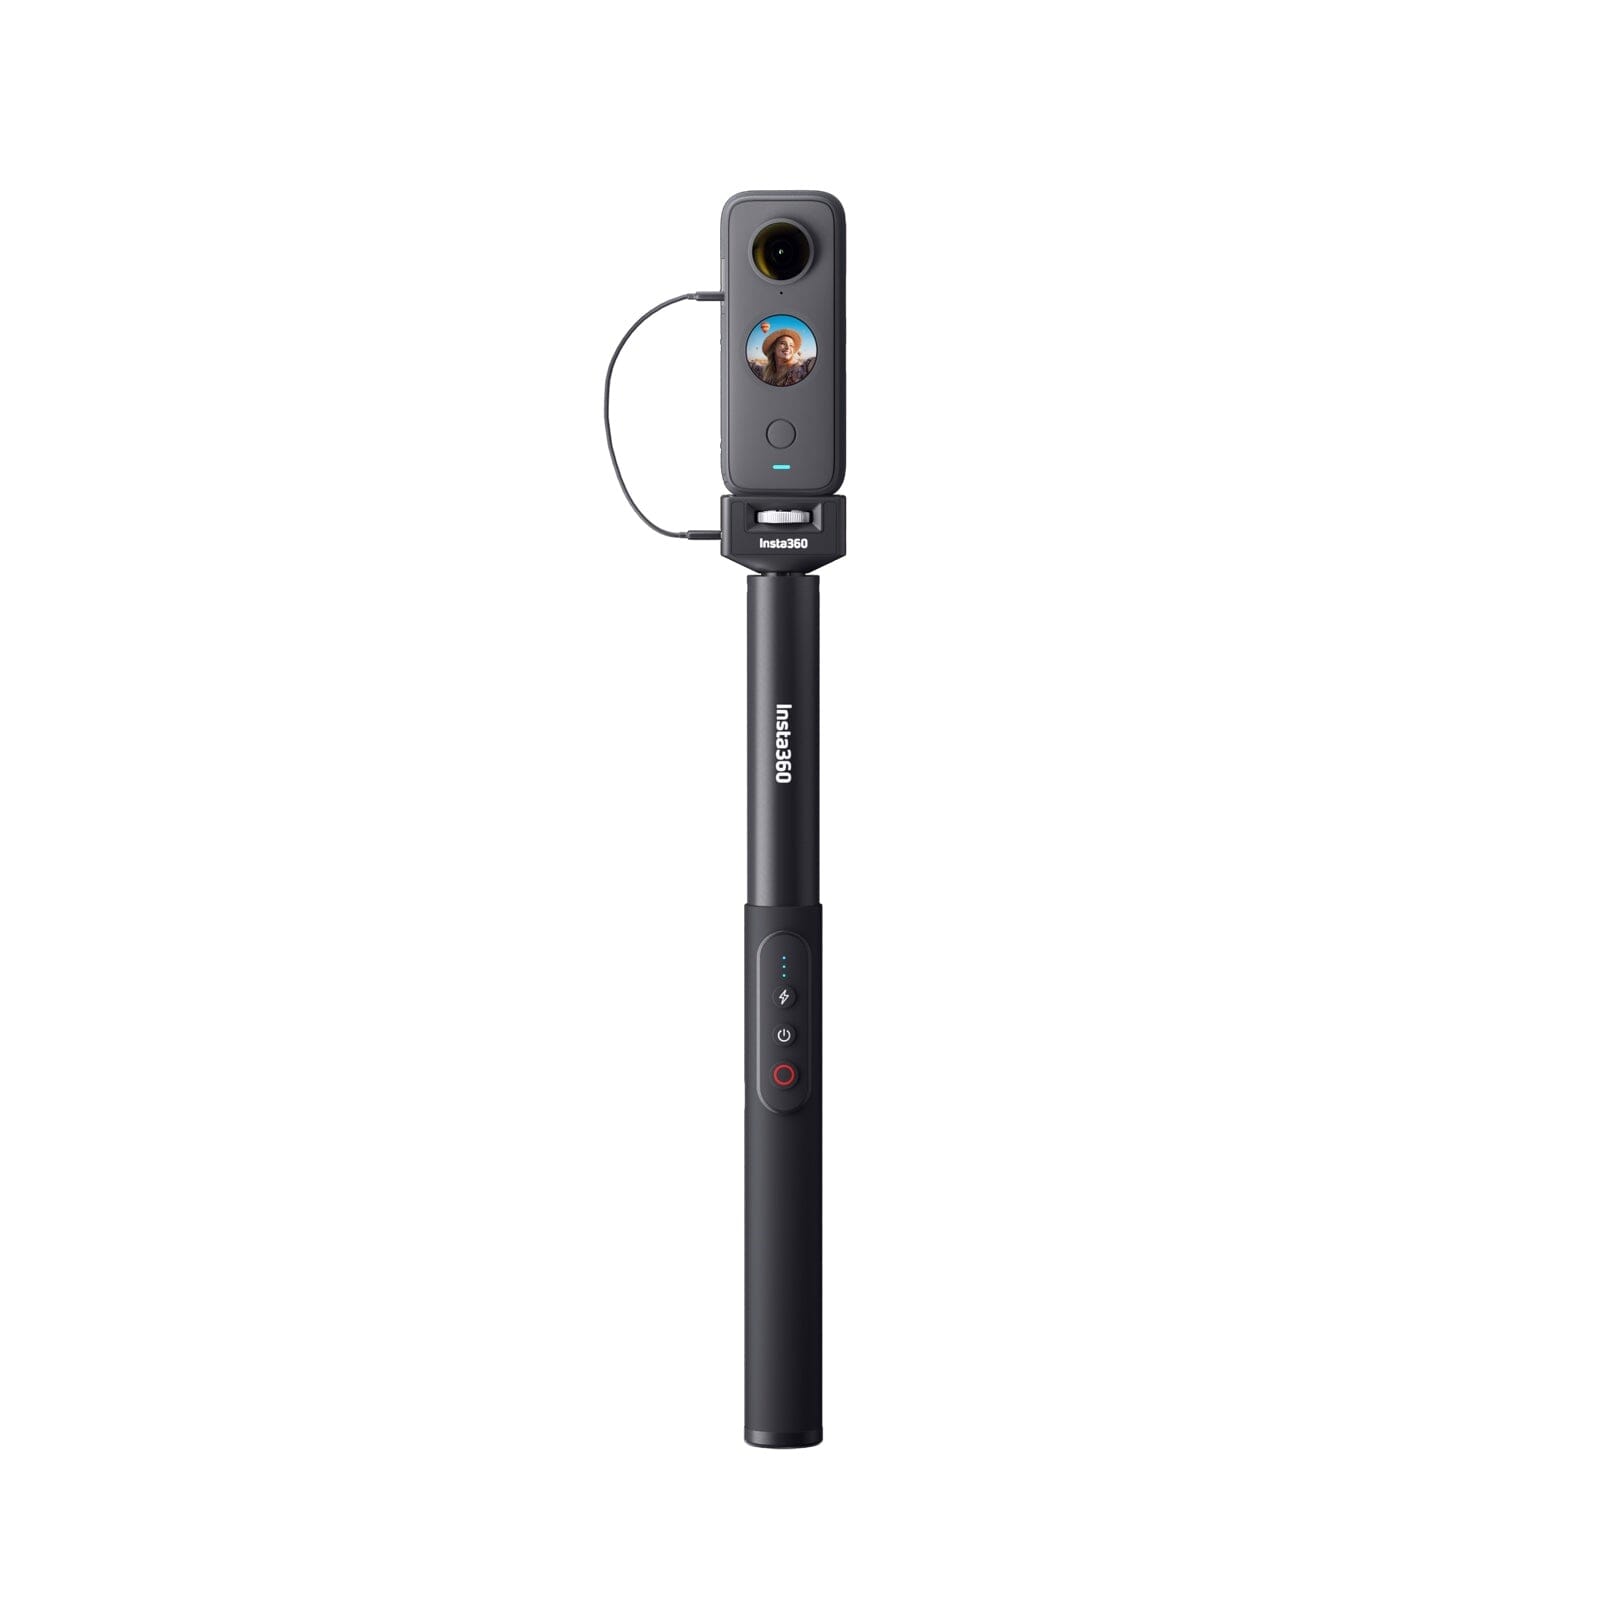 Insta360 - Power Selfie Stick, for X3 and ONE X2